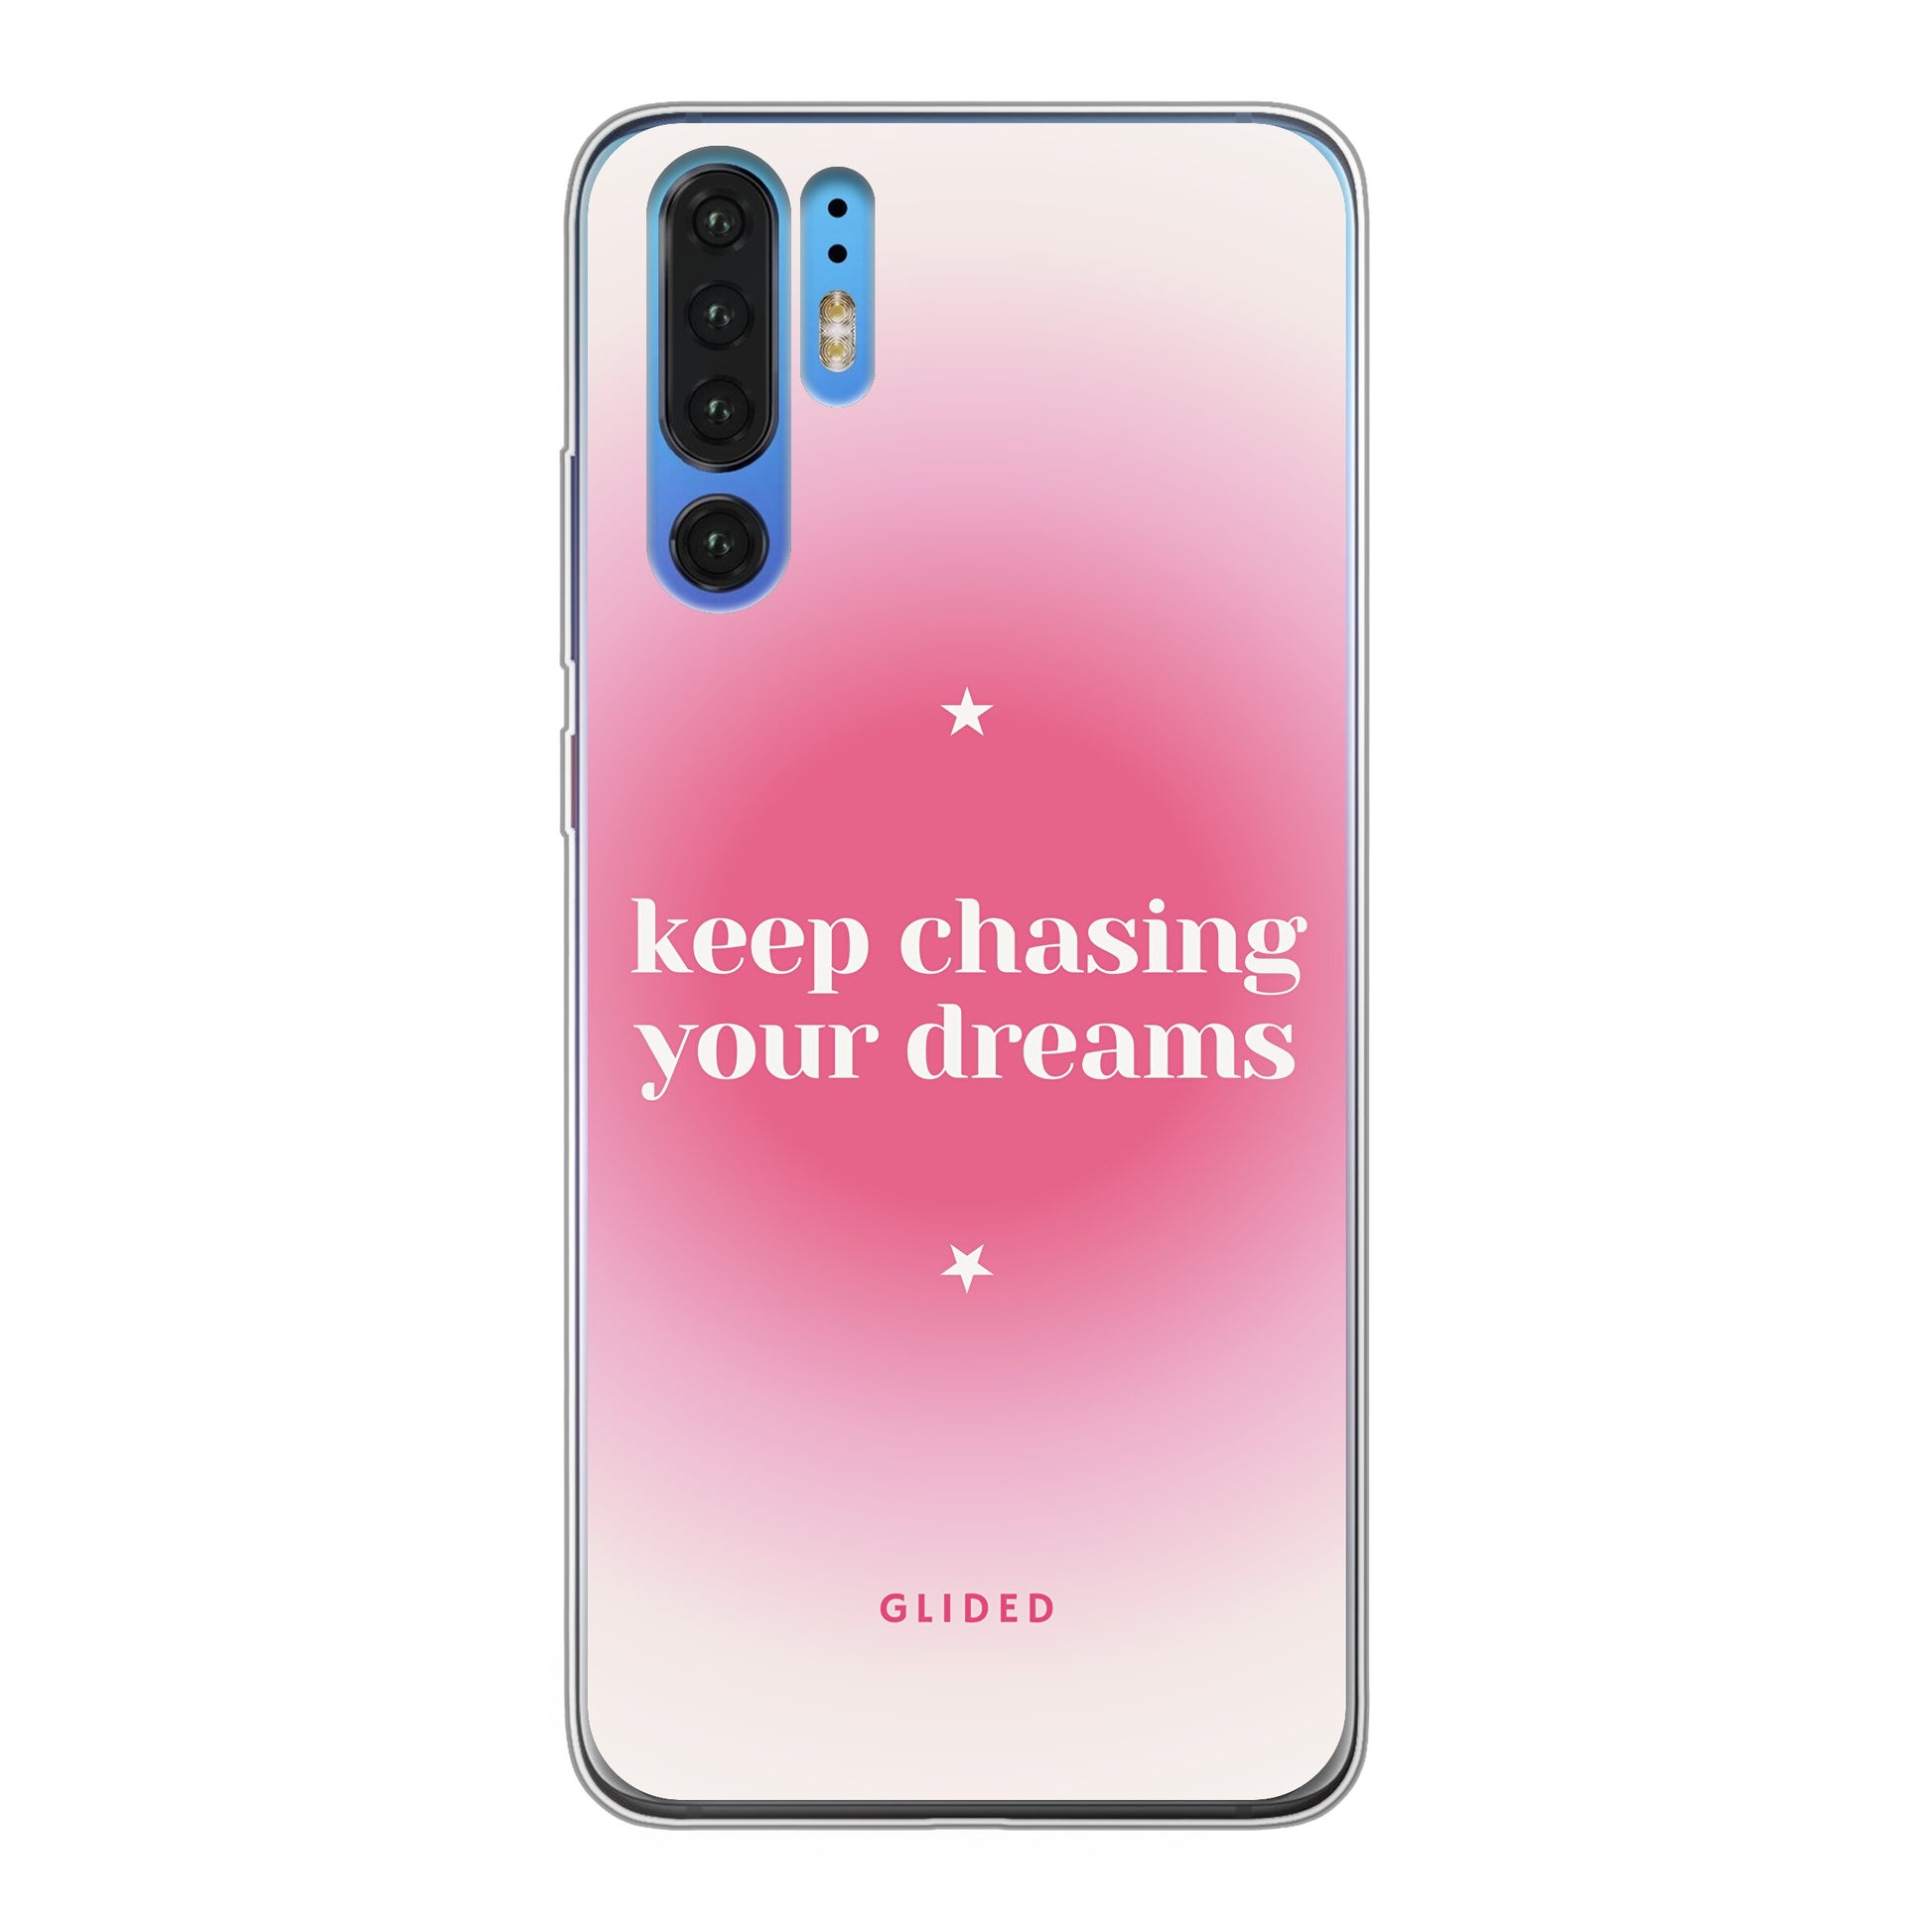 Chasing Dreams - Huawei P30 Pro Handyhülle Soft case